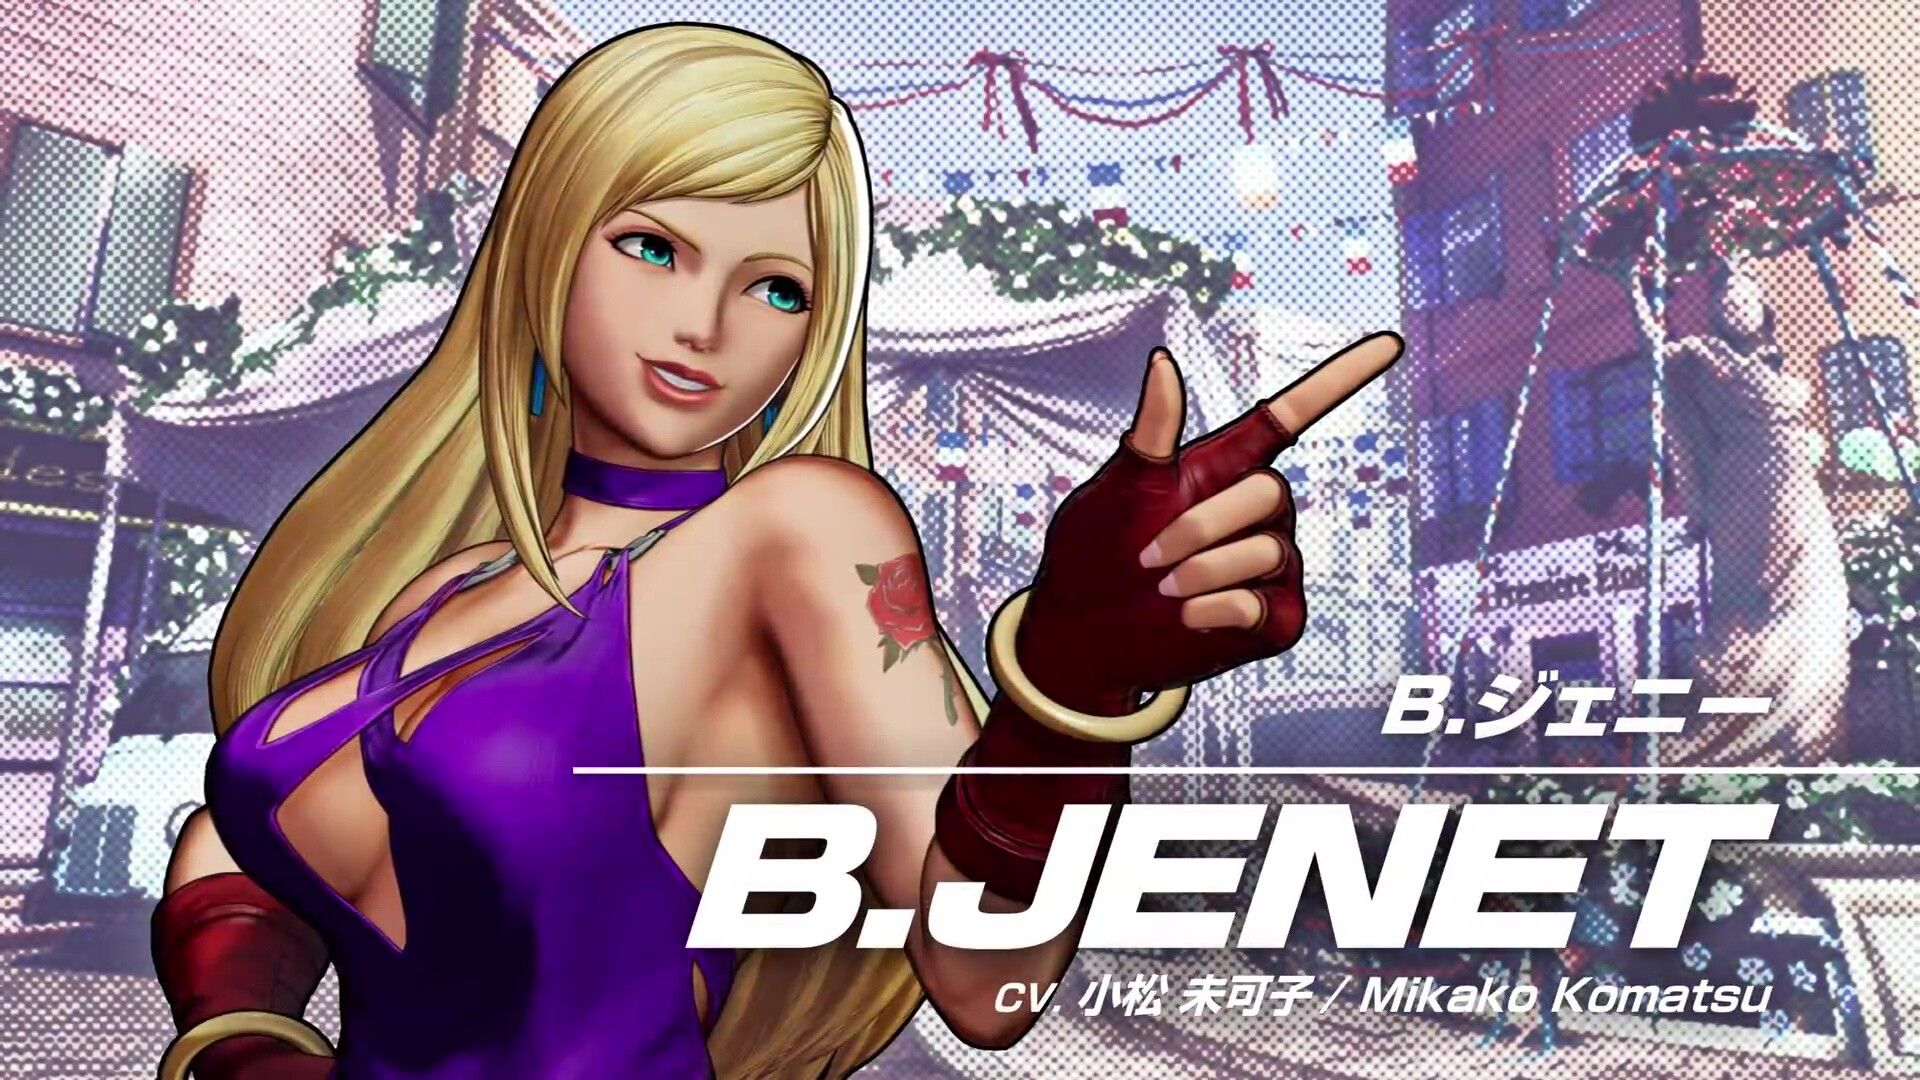 THE KING OF FIGHTERS XV B. Jenny enters the DLC in an erotic dress with and rounded thighs 8